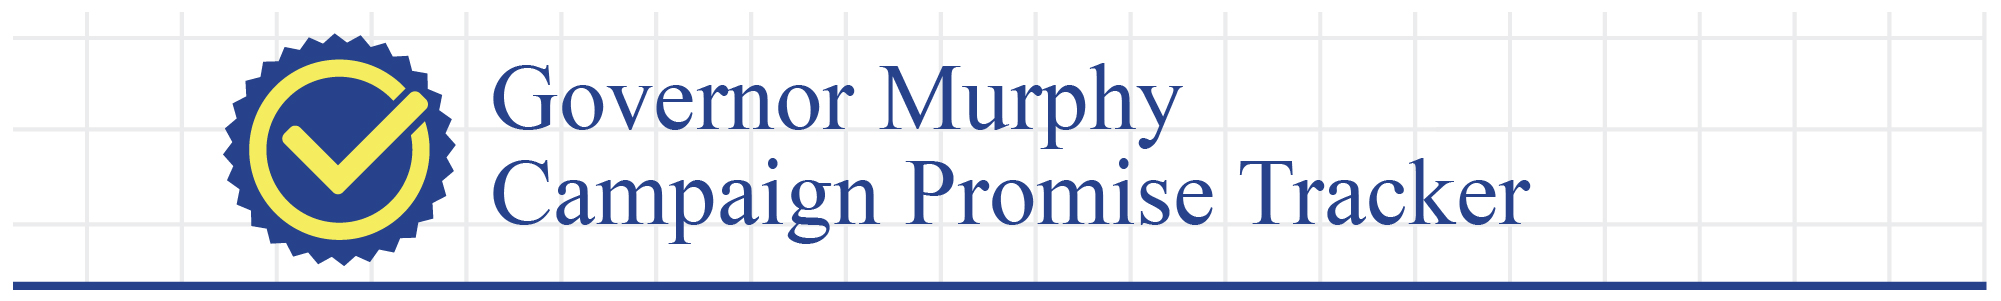 Governor Murphy Campaign Promise Tracker